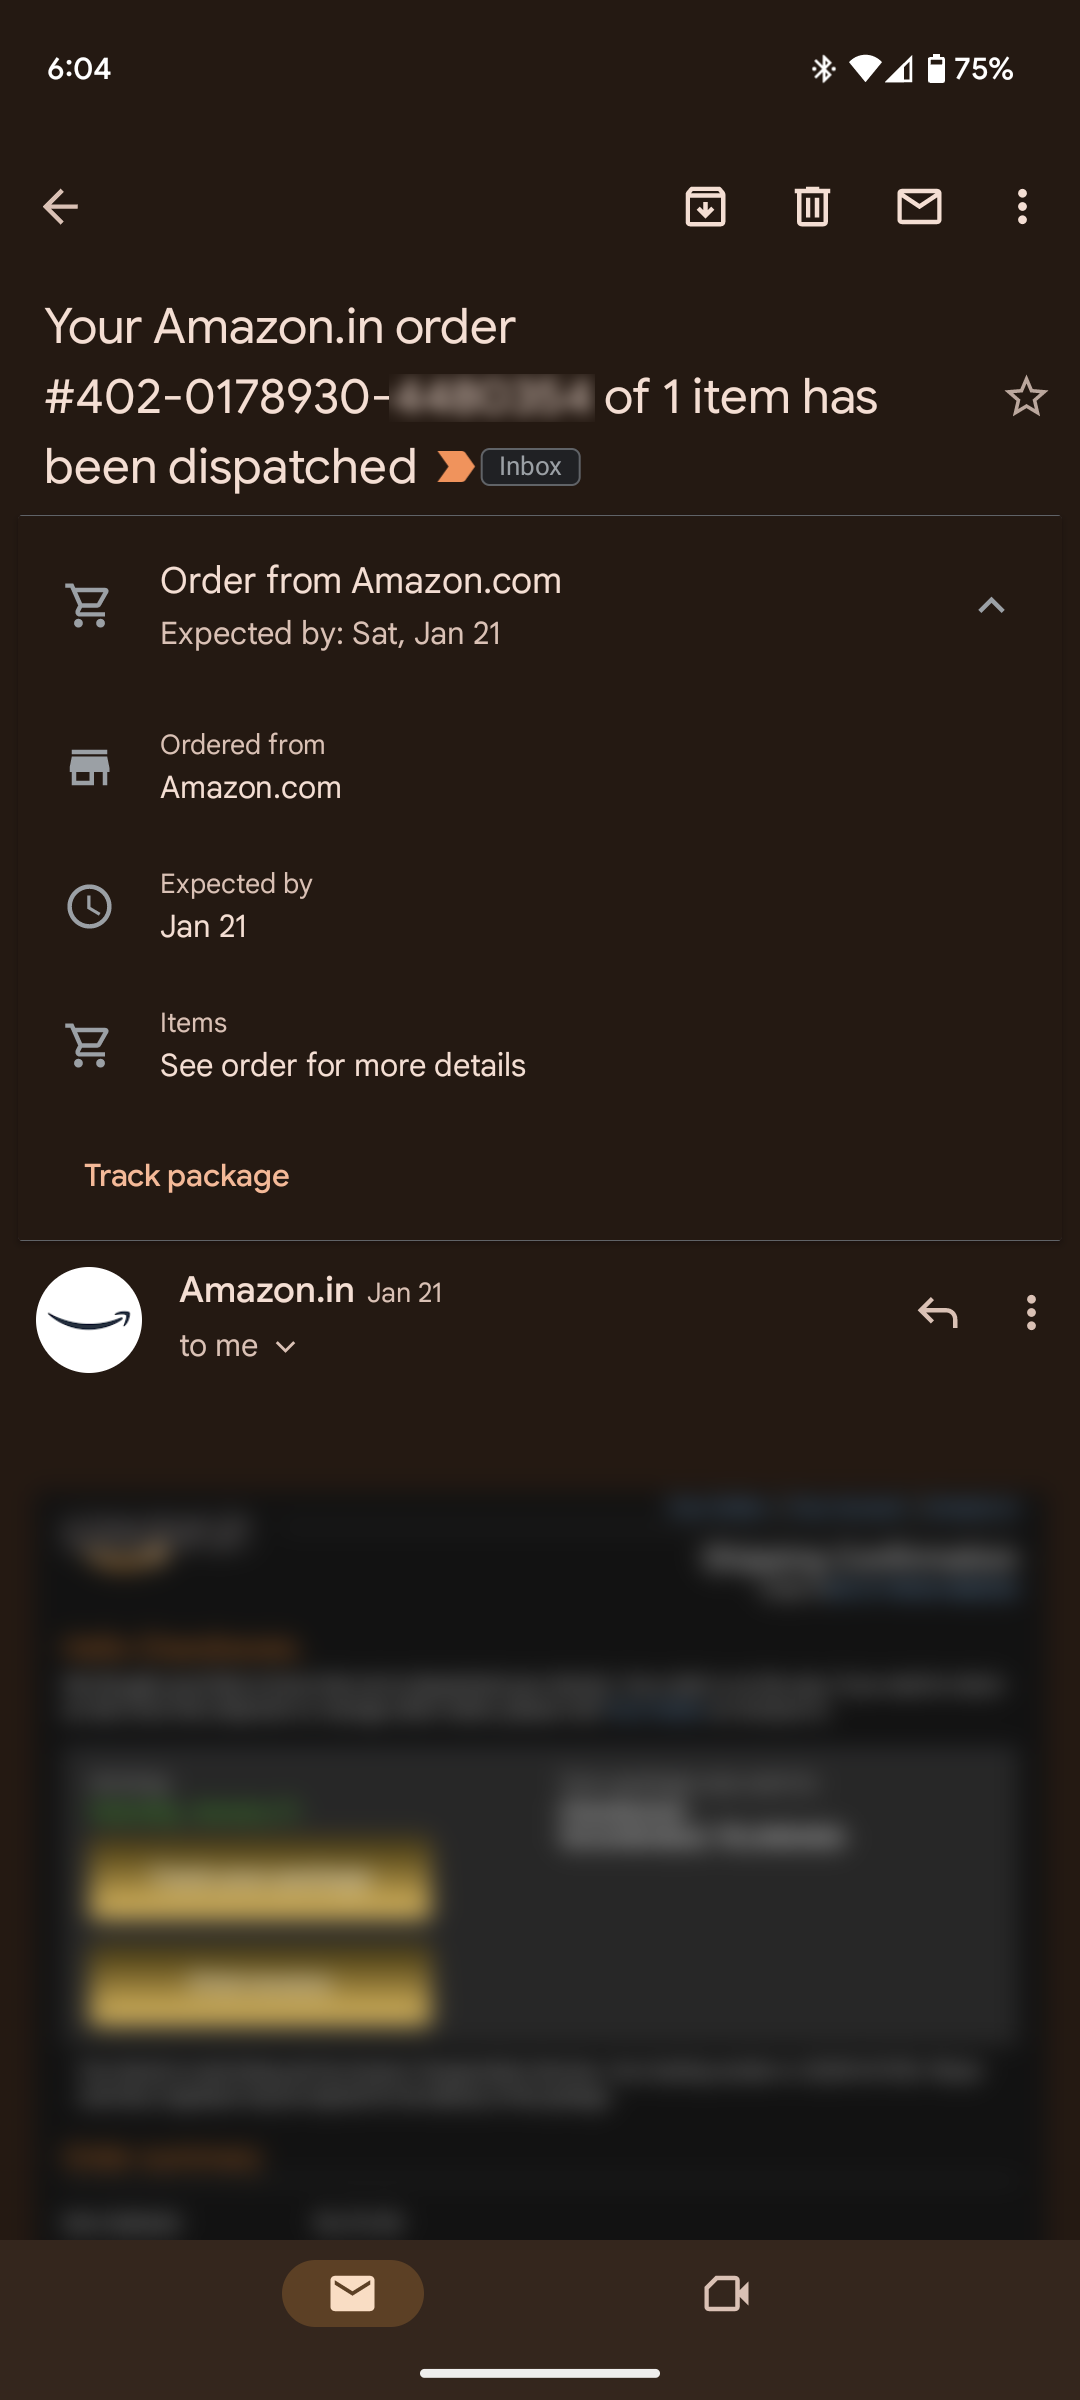 The Gmail package tracing status of an Amazon order